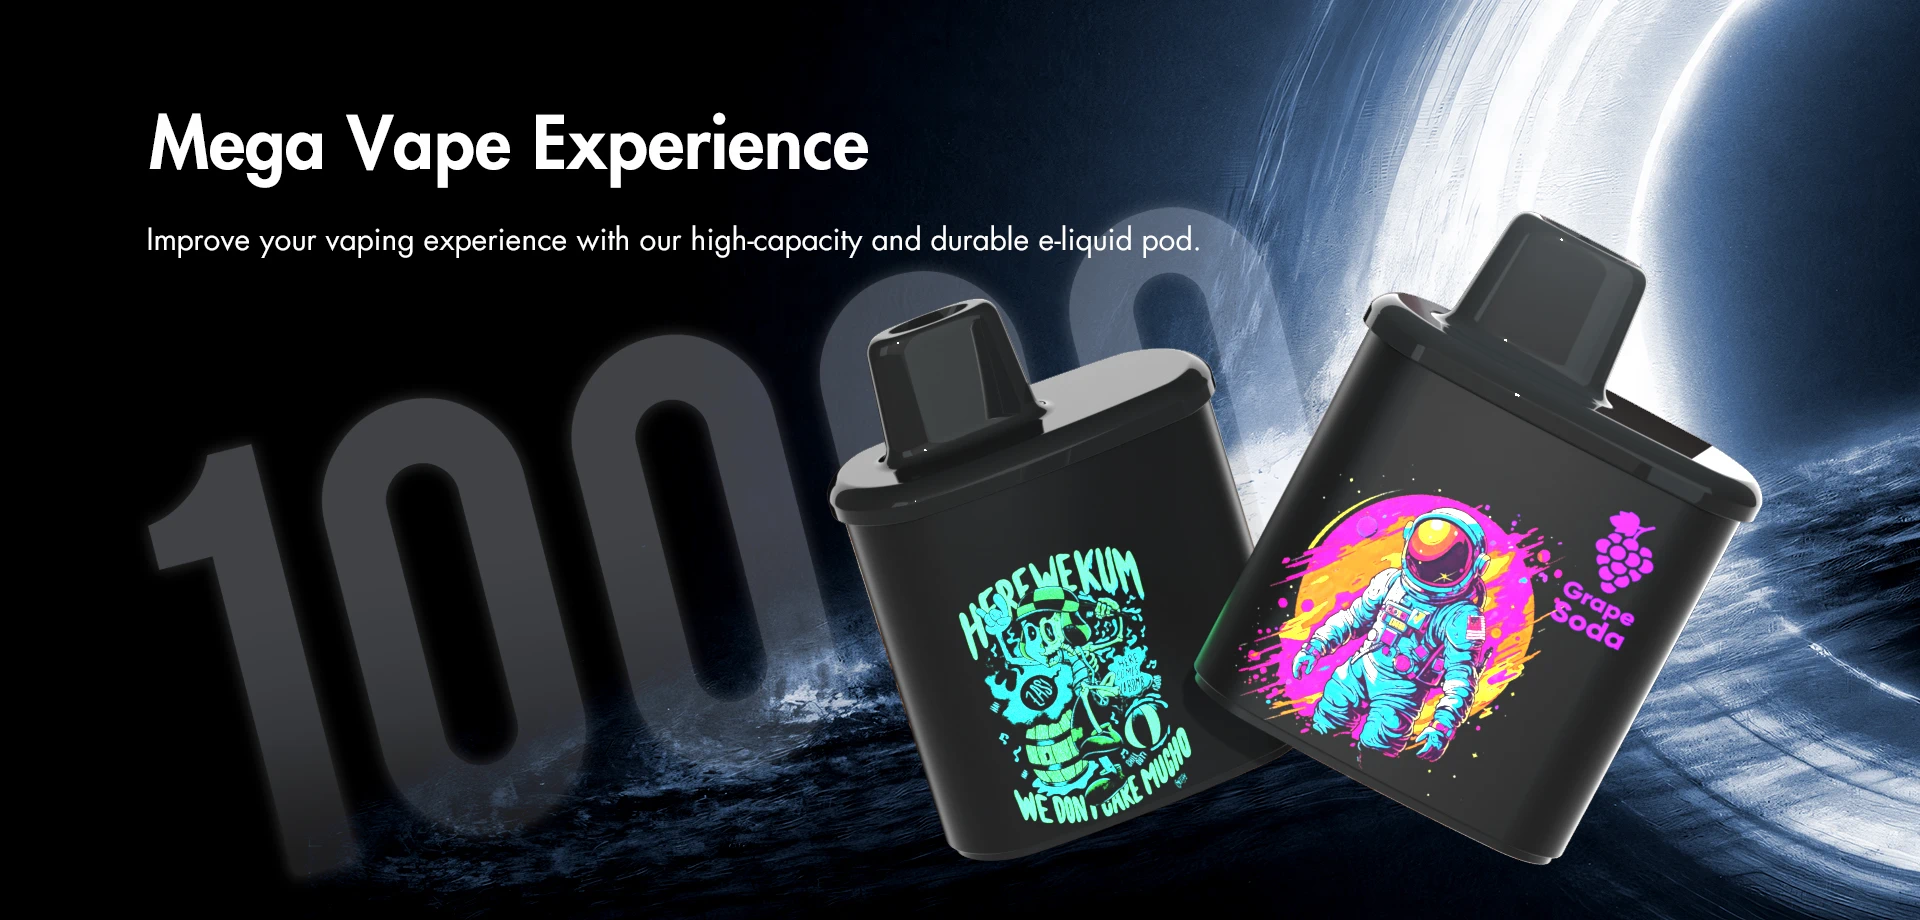 Mega Vape Experience Improve your vaping experience with our high-capacity and durable e-liquid pod.